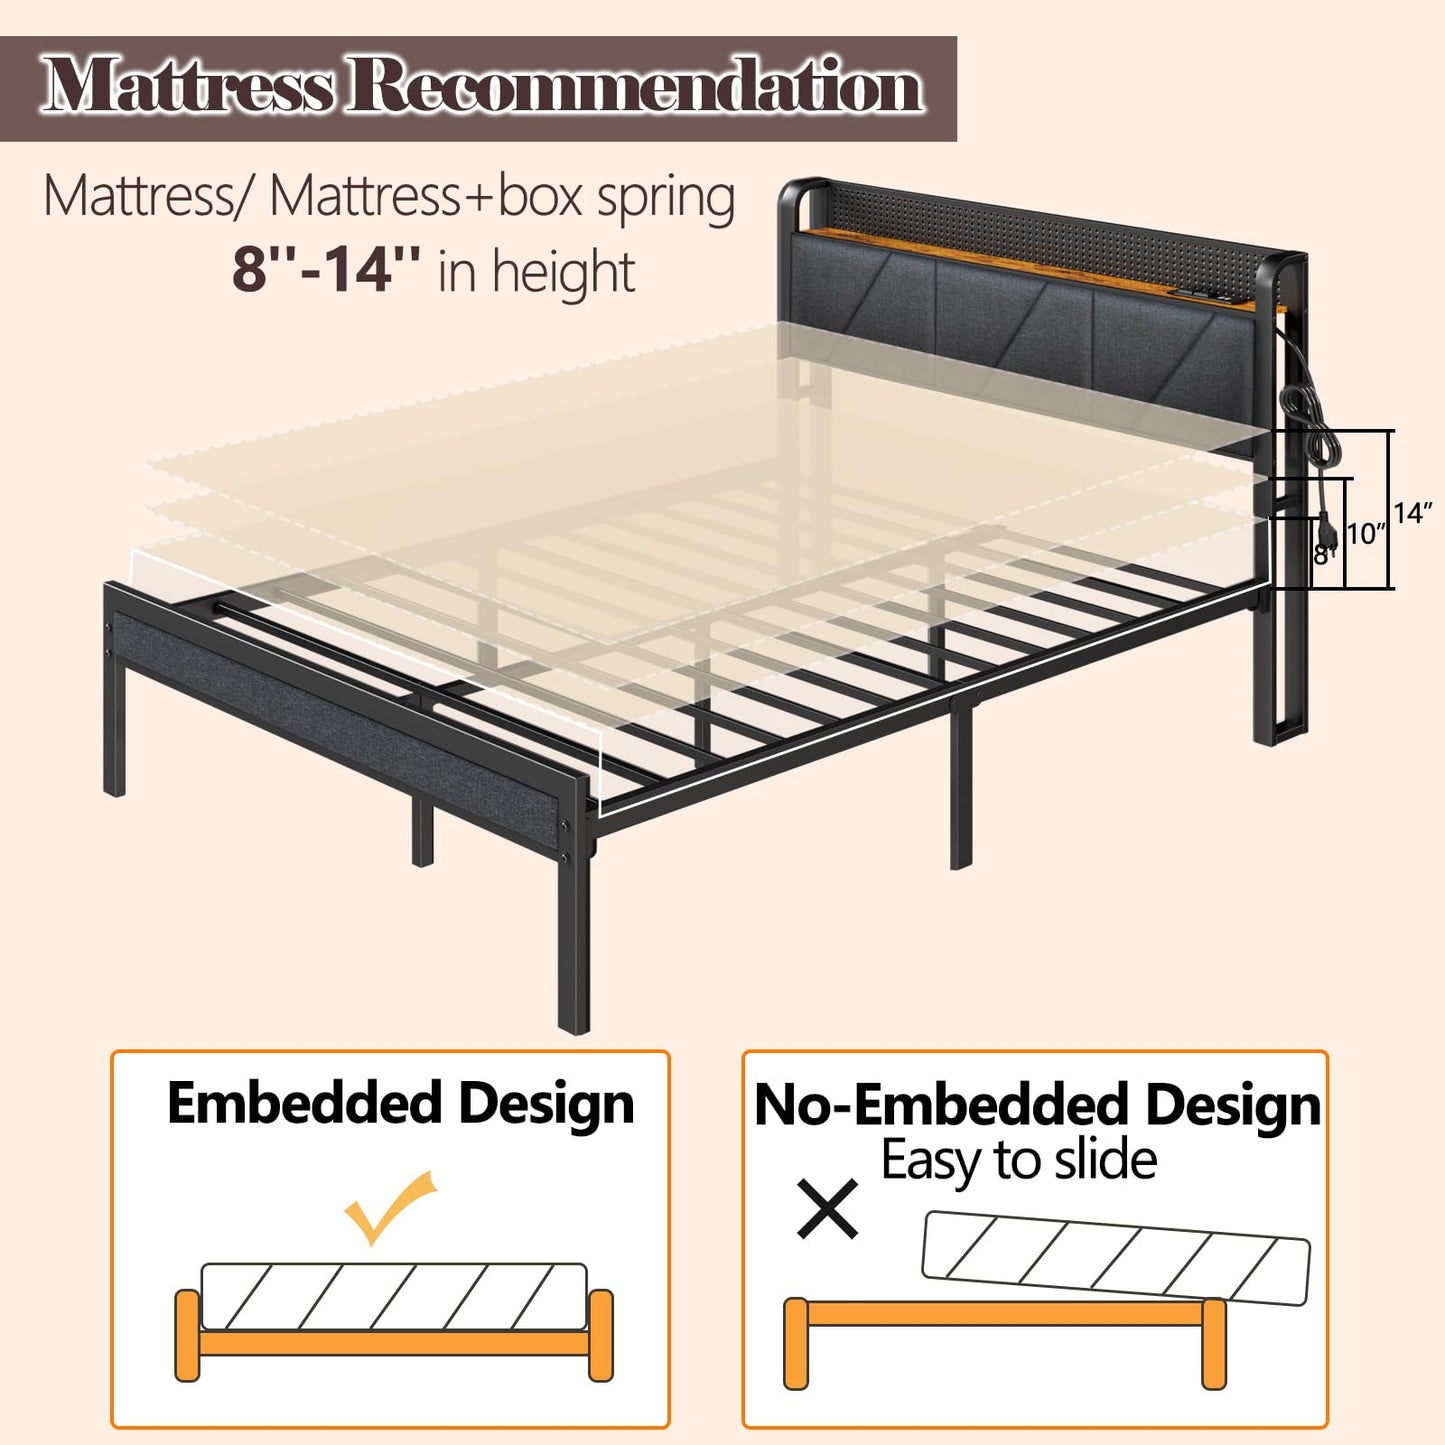 Furnulem Queen Size Bed Frame with Headboard and LED Lights,Upholstered Bedframe with Charging Station and USB Port, Platform Metal Bed Frame,No Box Spring Needed, Noise Free